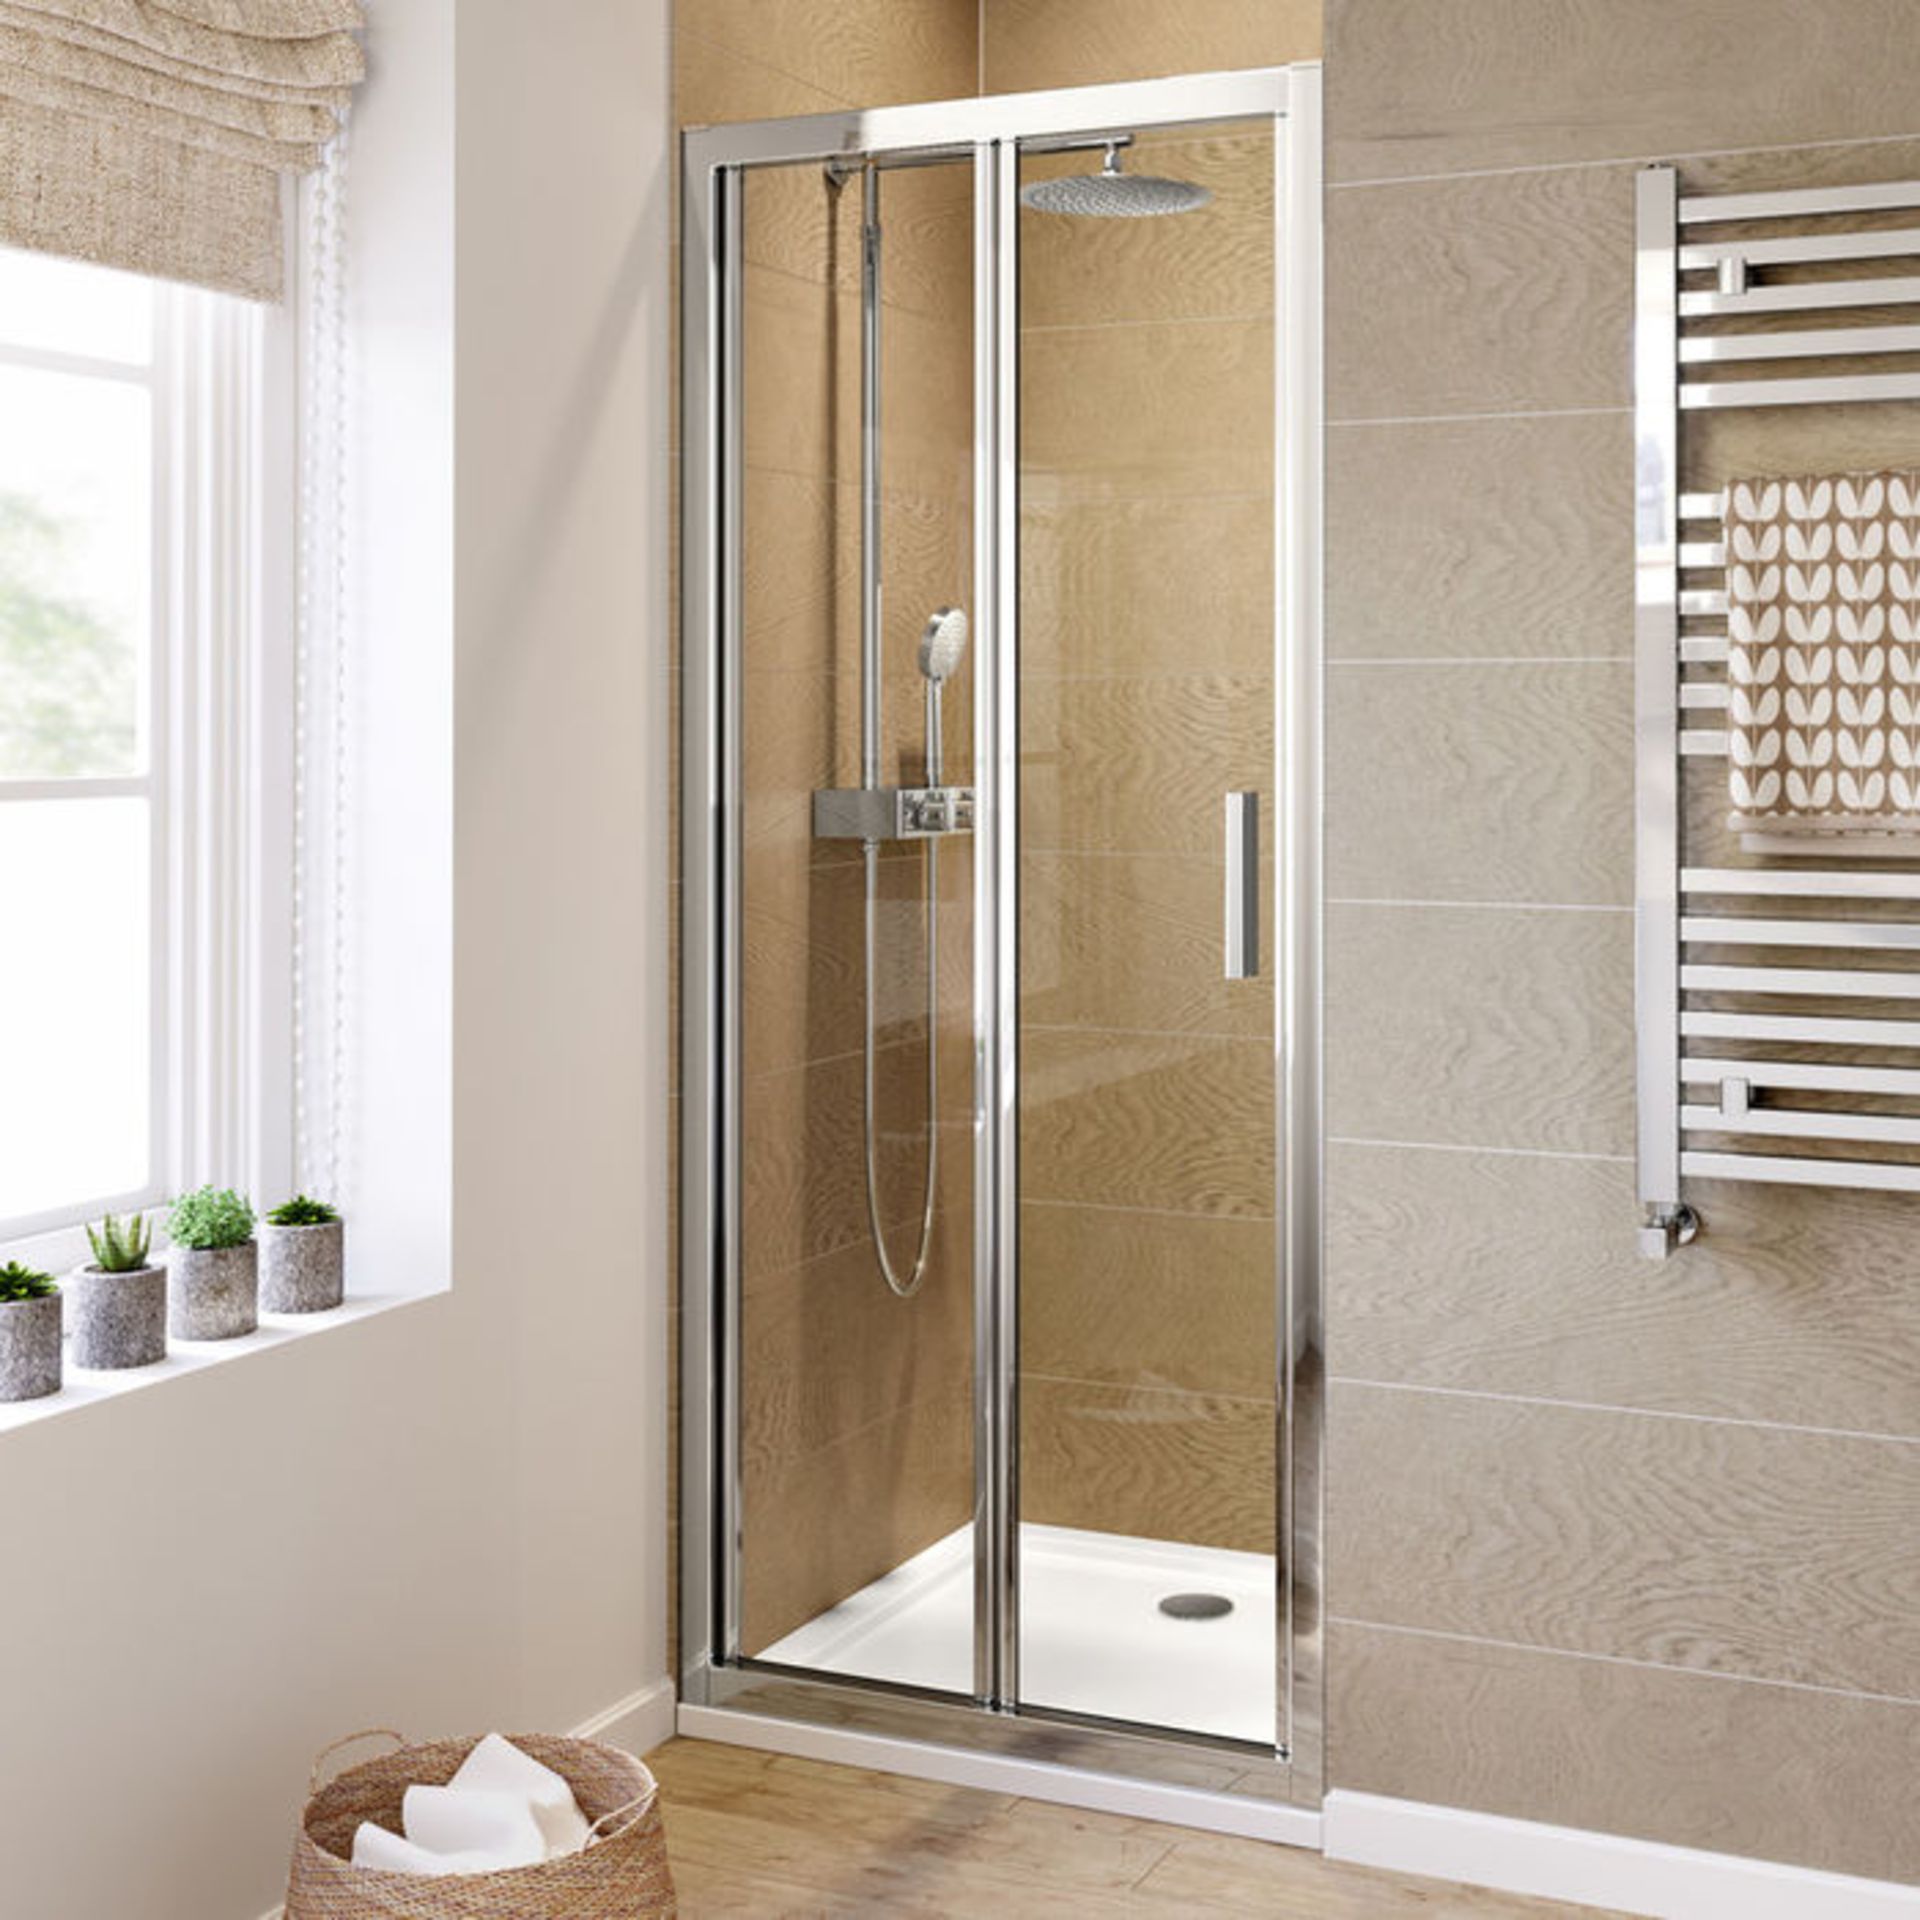 (L21) 900mm - 6mm - Elements EasyClean Bifold Shower Door. RRP £299.99. We love this because Bi-Fold - Image 2 of 3